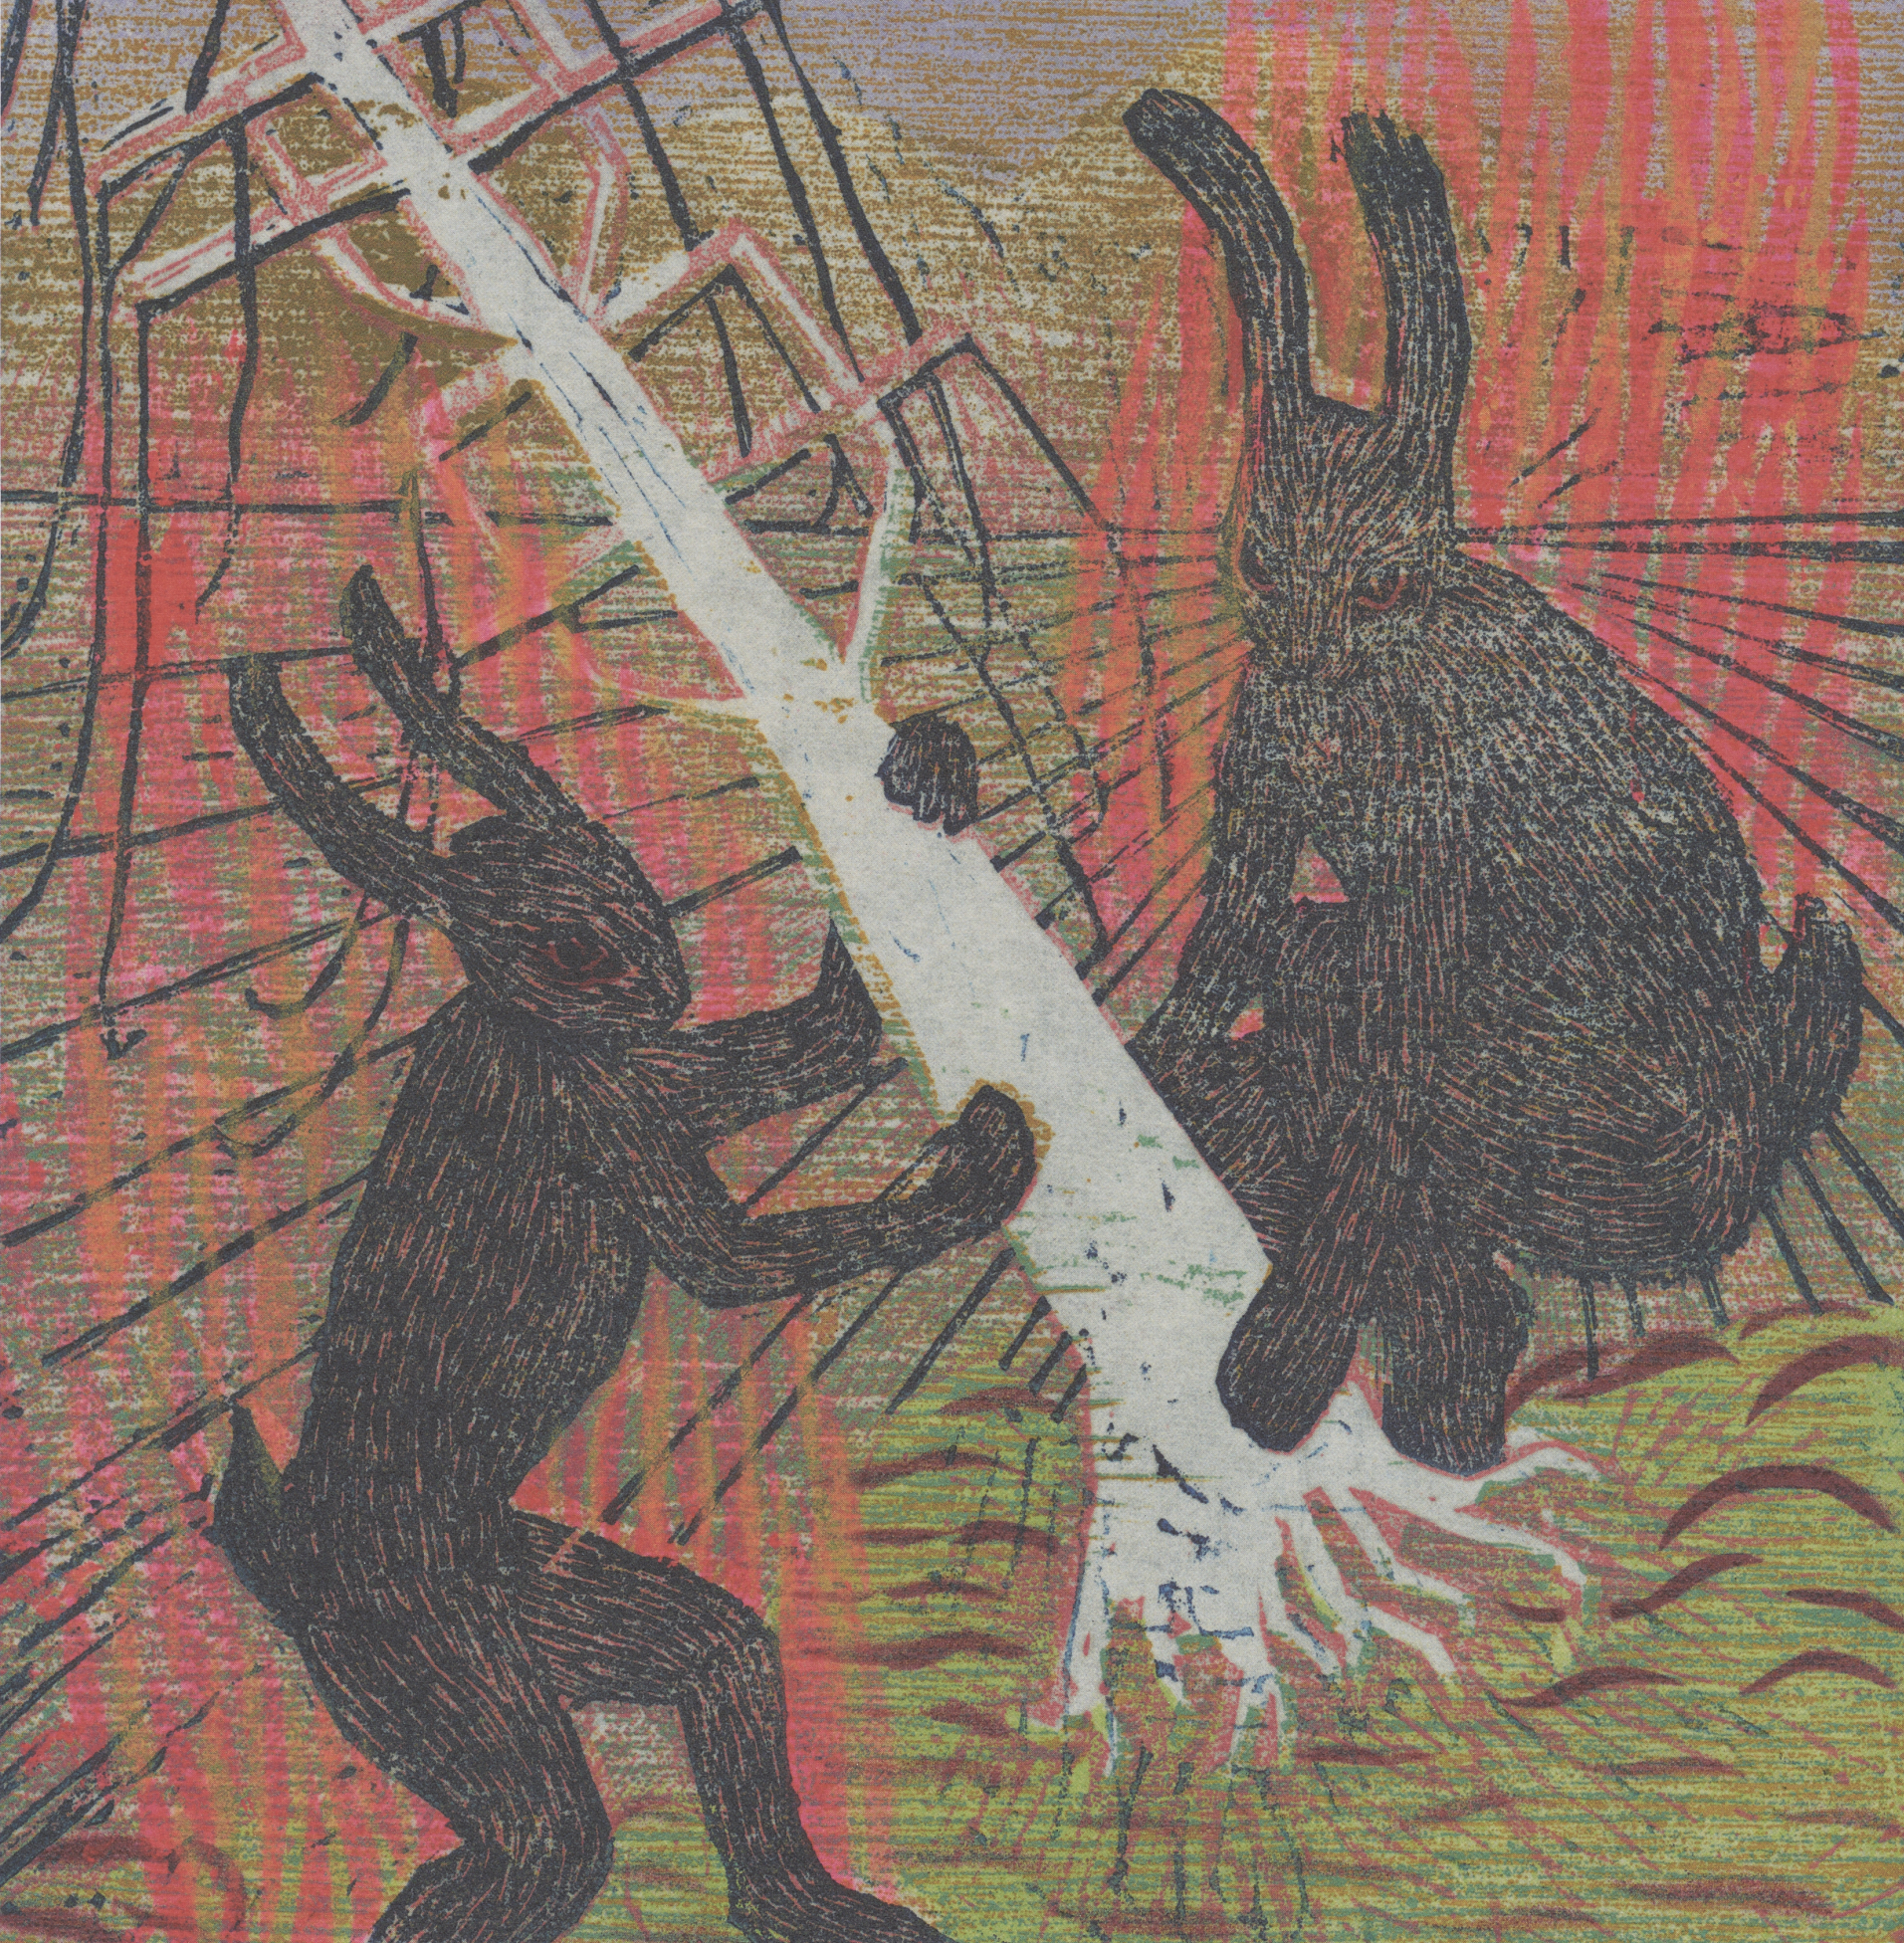 A print of two, black rabbit figures pulling a white electrical tower with tree-like roots and severed electric lines, out of the ground. The Figures are surrounded by frantic red marks.